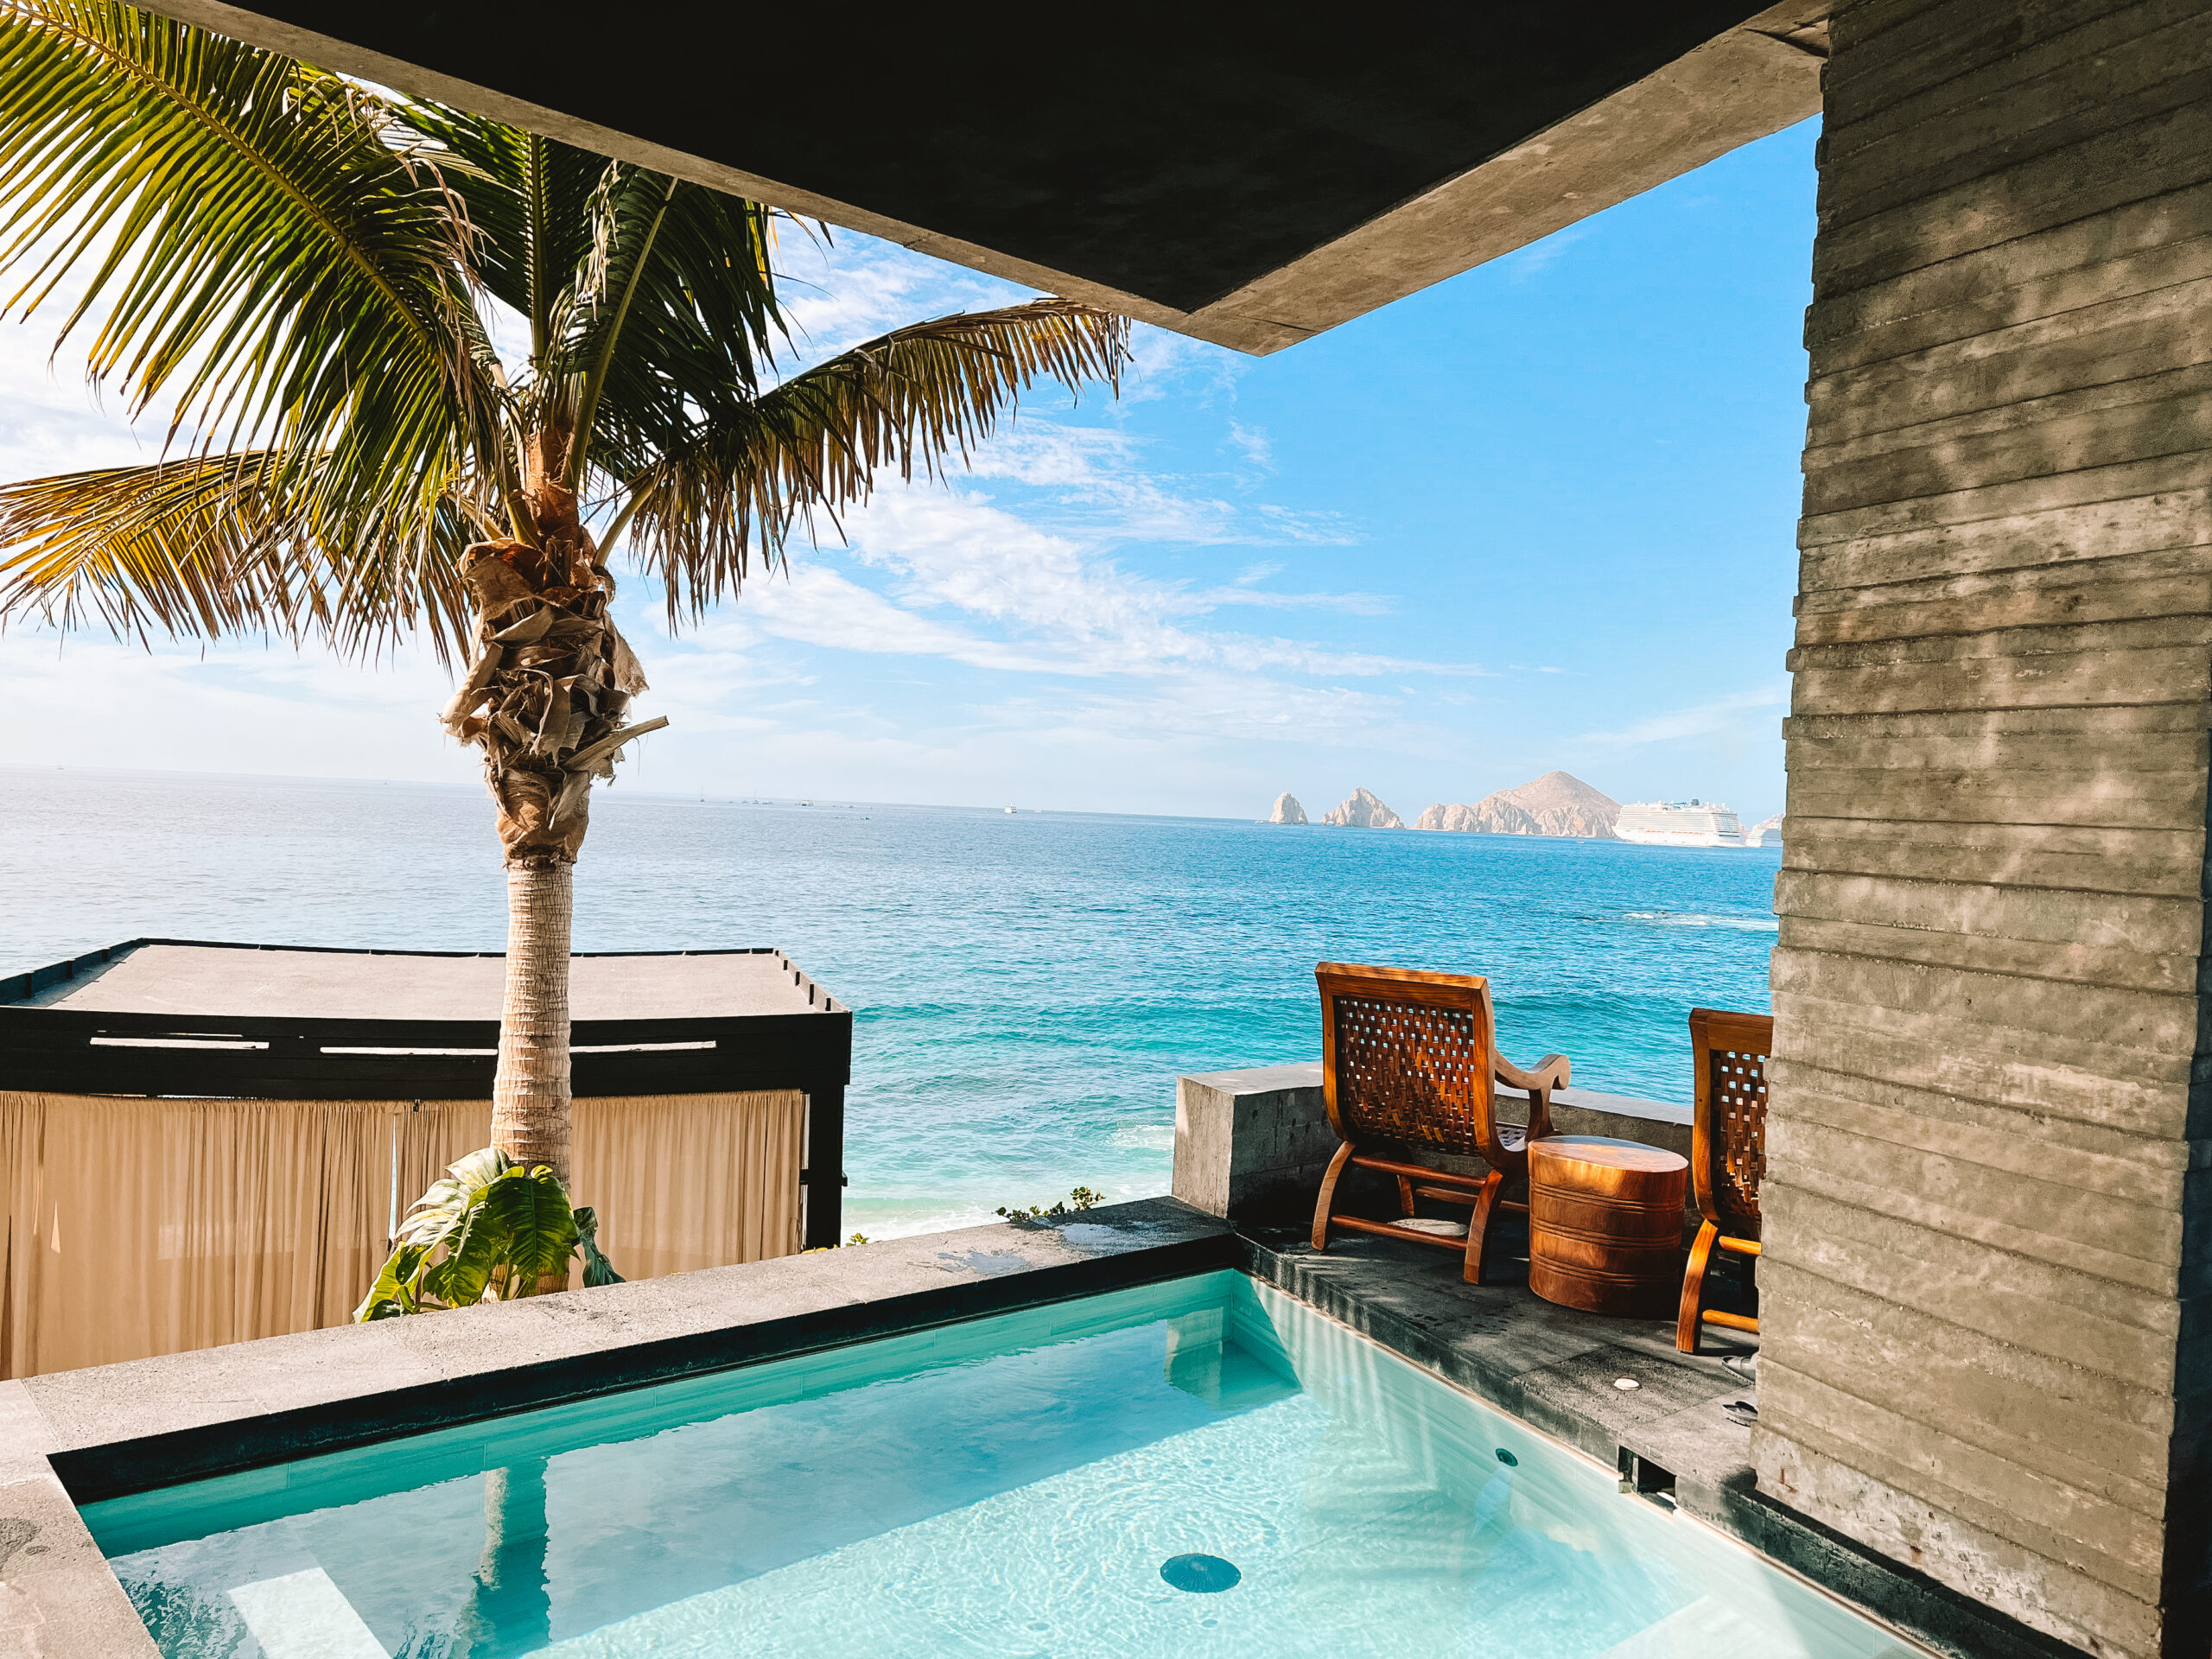 views for days from the spa at the Cape, a Thompson Hotel in Cabo San Lucas, Mexico #thecape #mexico #luxuryresort